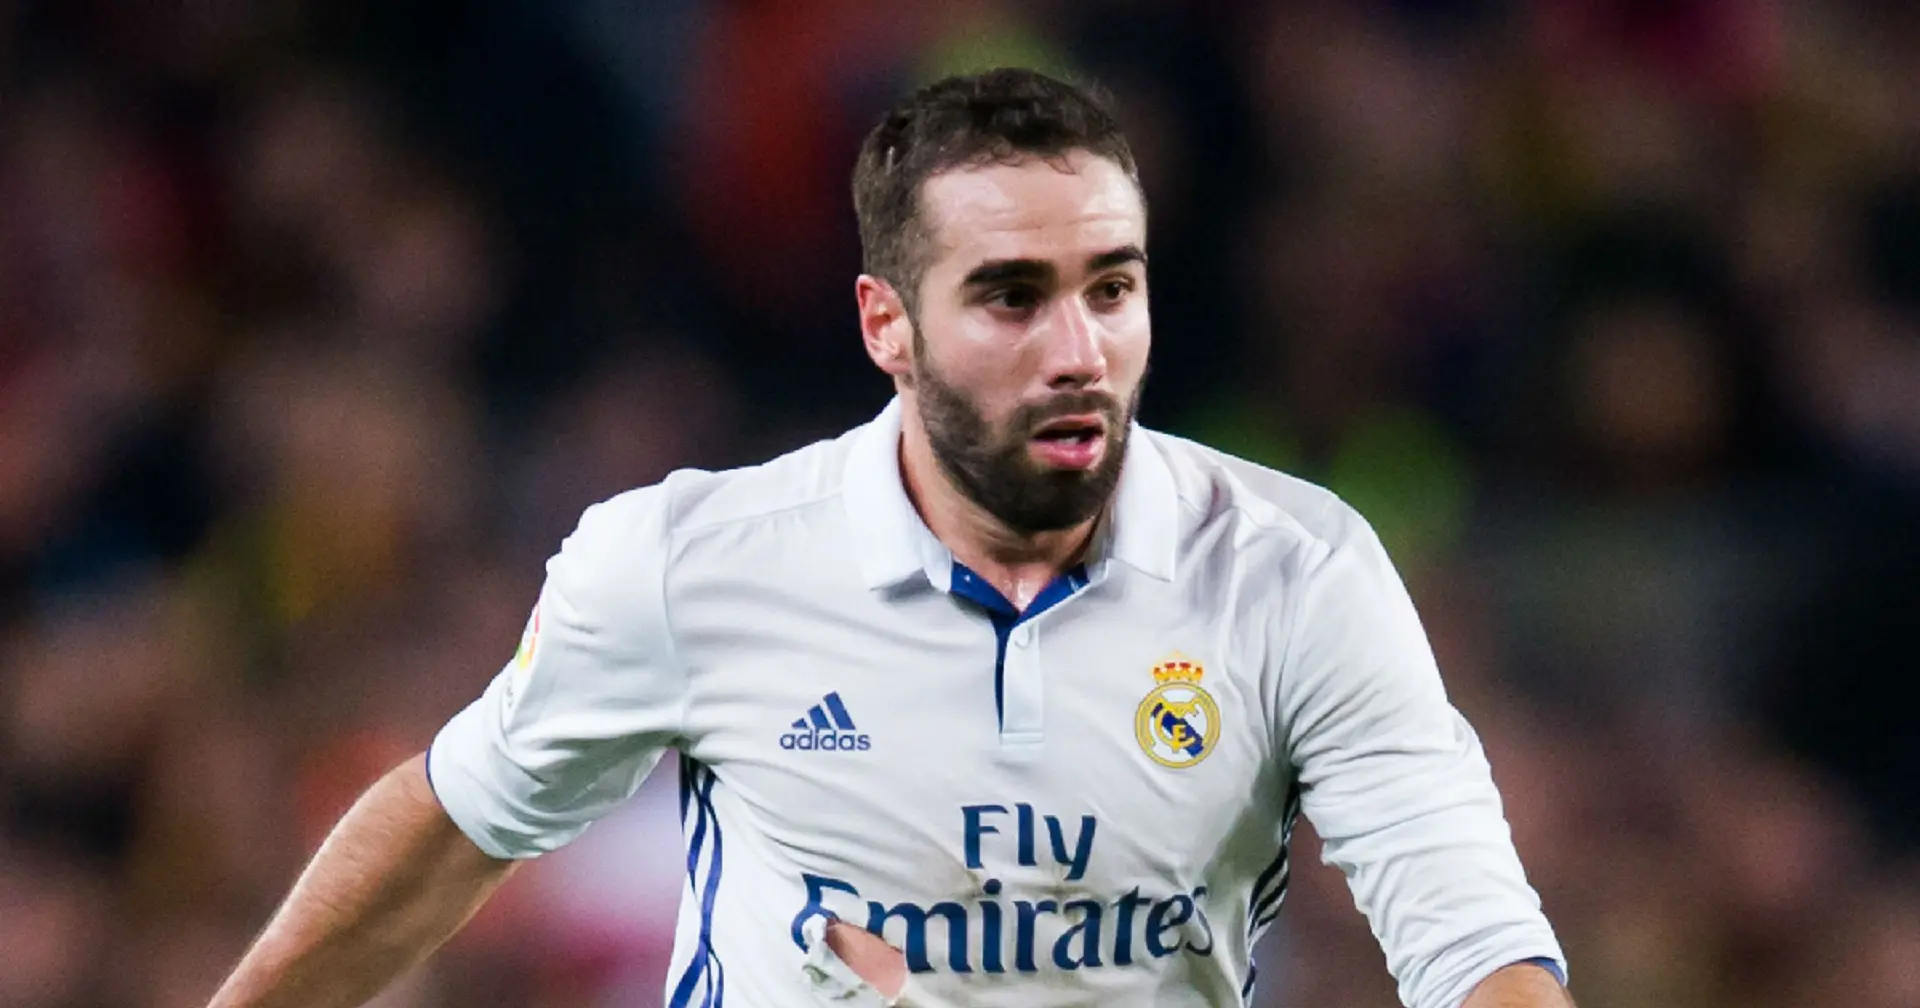 Revealed: Why Carvajal is a top-quality bargain for Real Madrid when compared to European sides